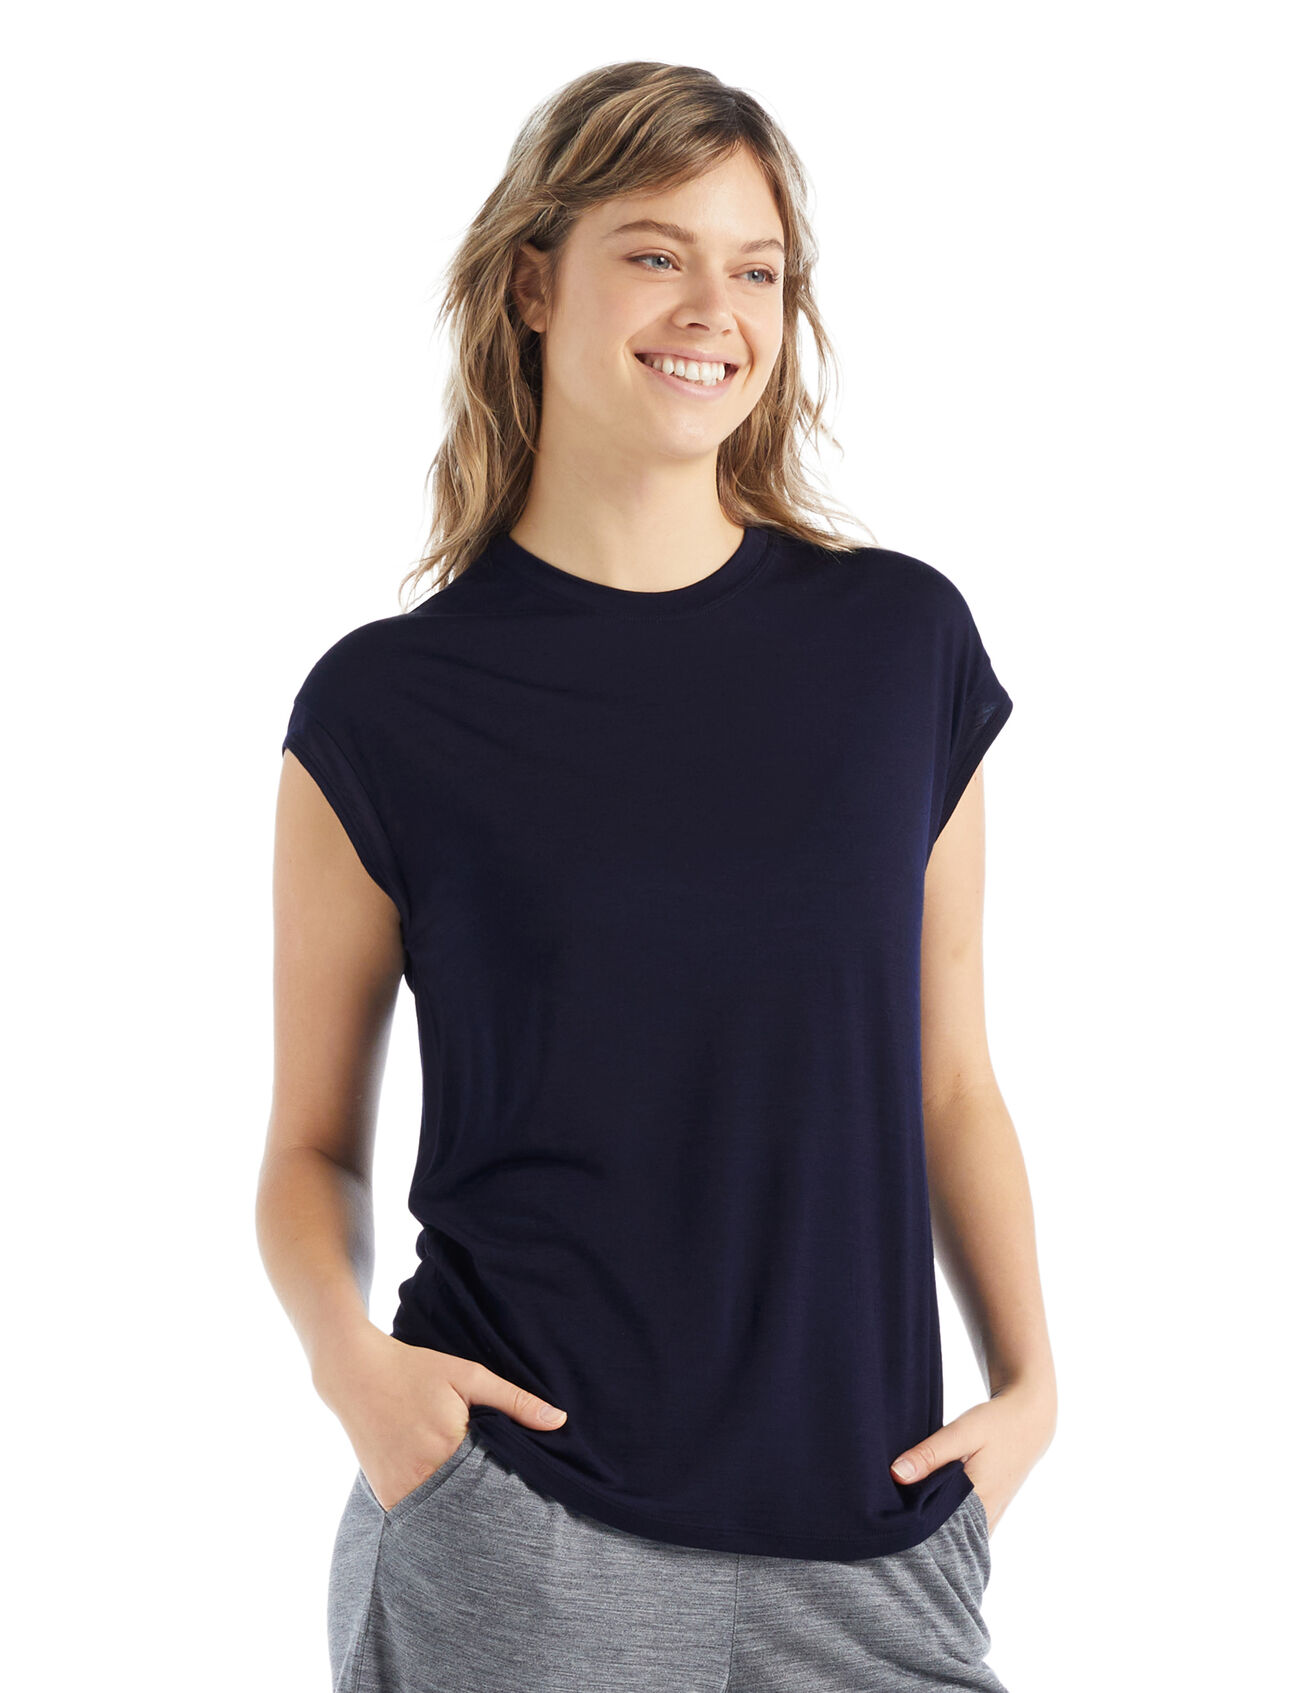 Womens Merino Drayden Sleeveless Top A comfy, everyday shirt made with our Cool-Lite™ blend of merino wool and TENCEL™, the Drayden Sleeveless Top offers natural breathability and softness with unique style.